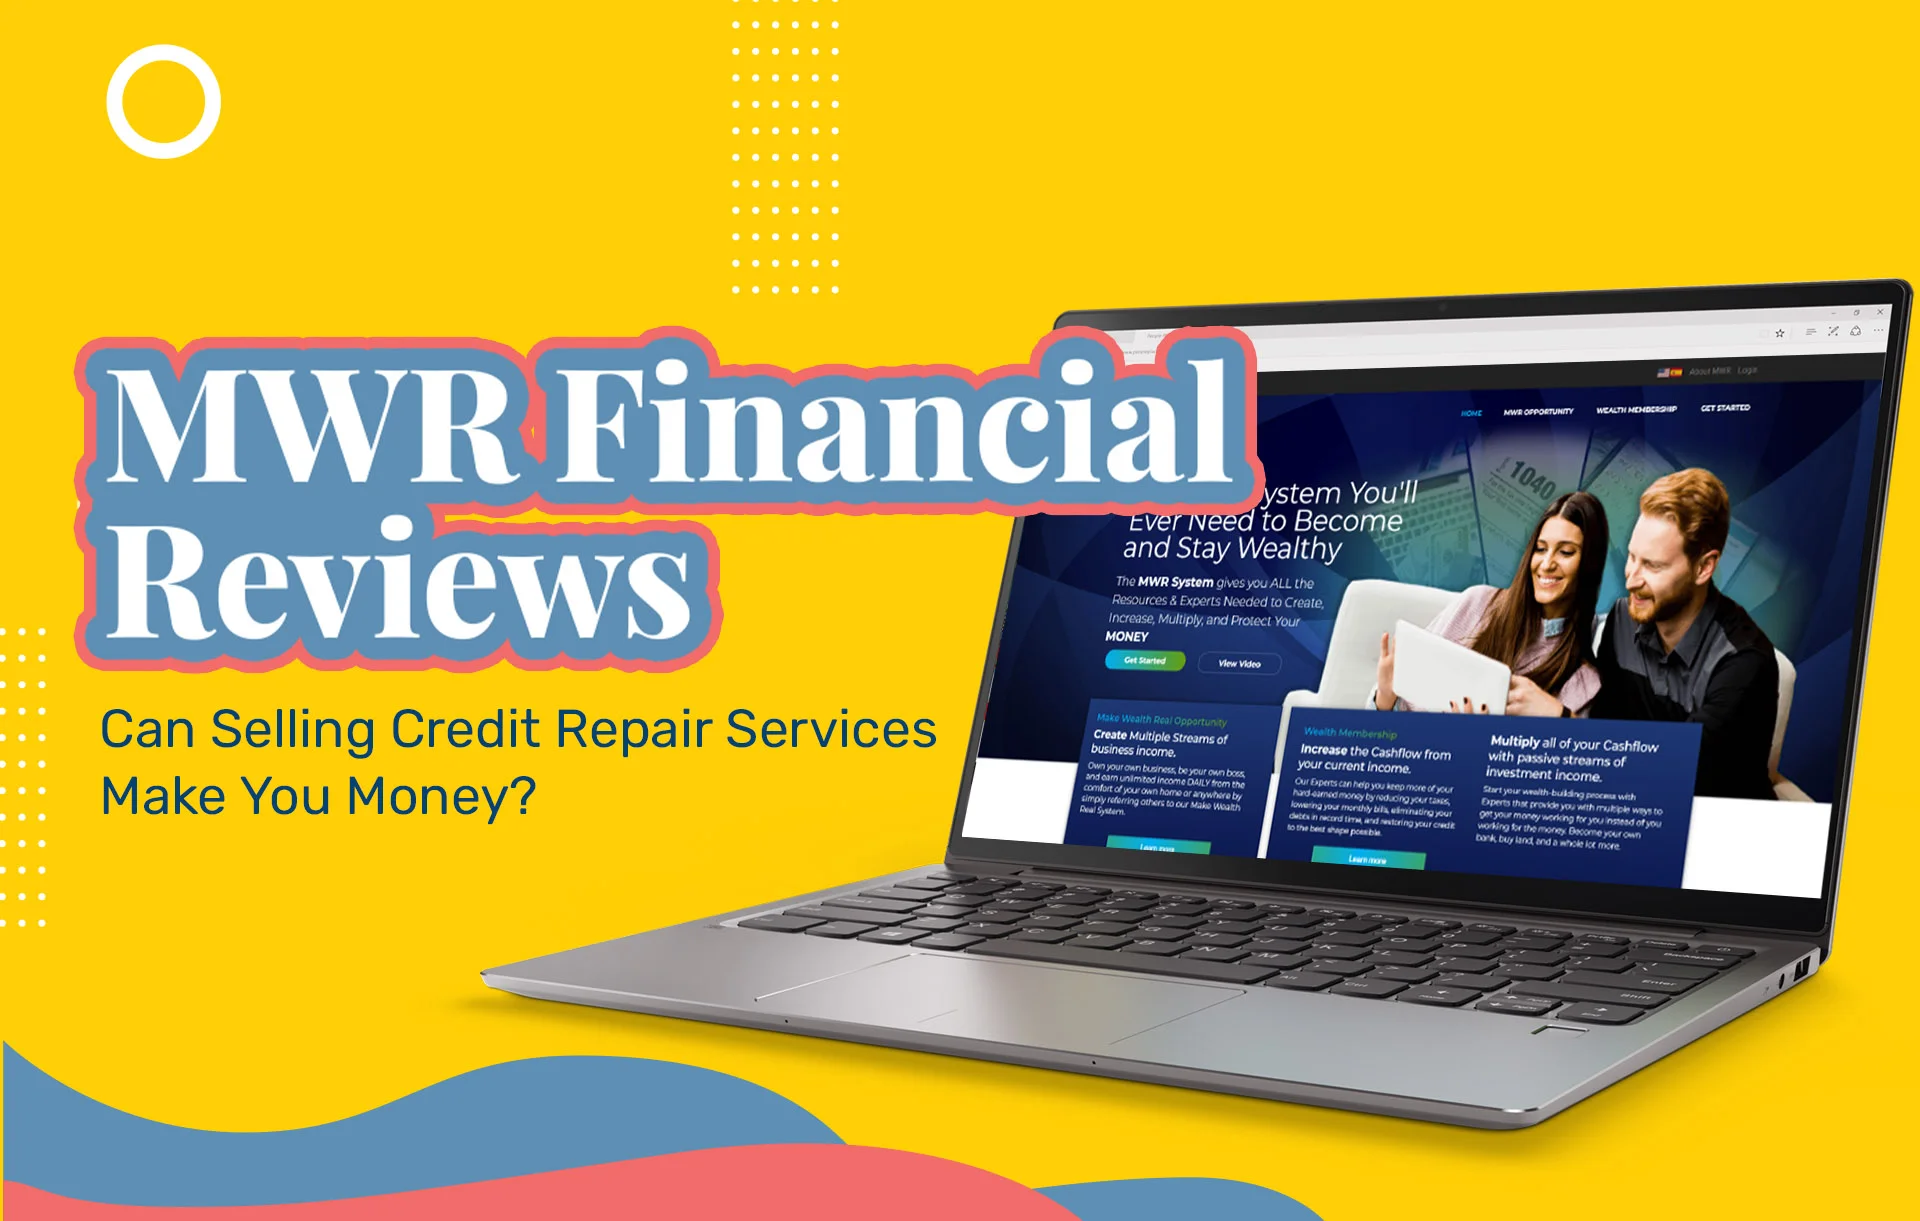 MWR Financial Reviews: Just Like All the Rest?